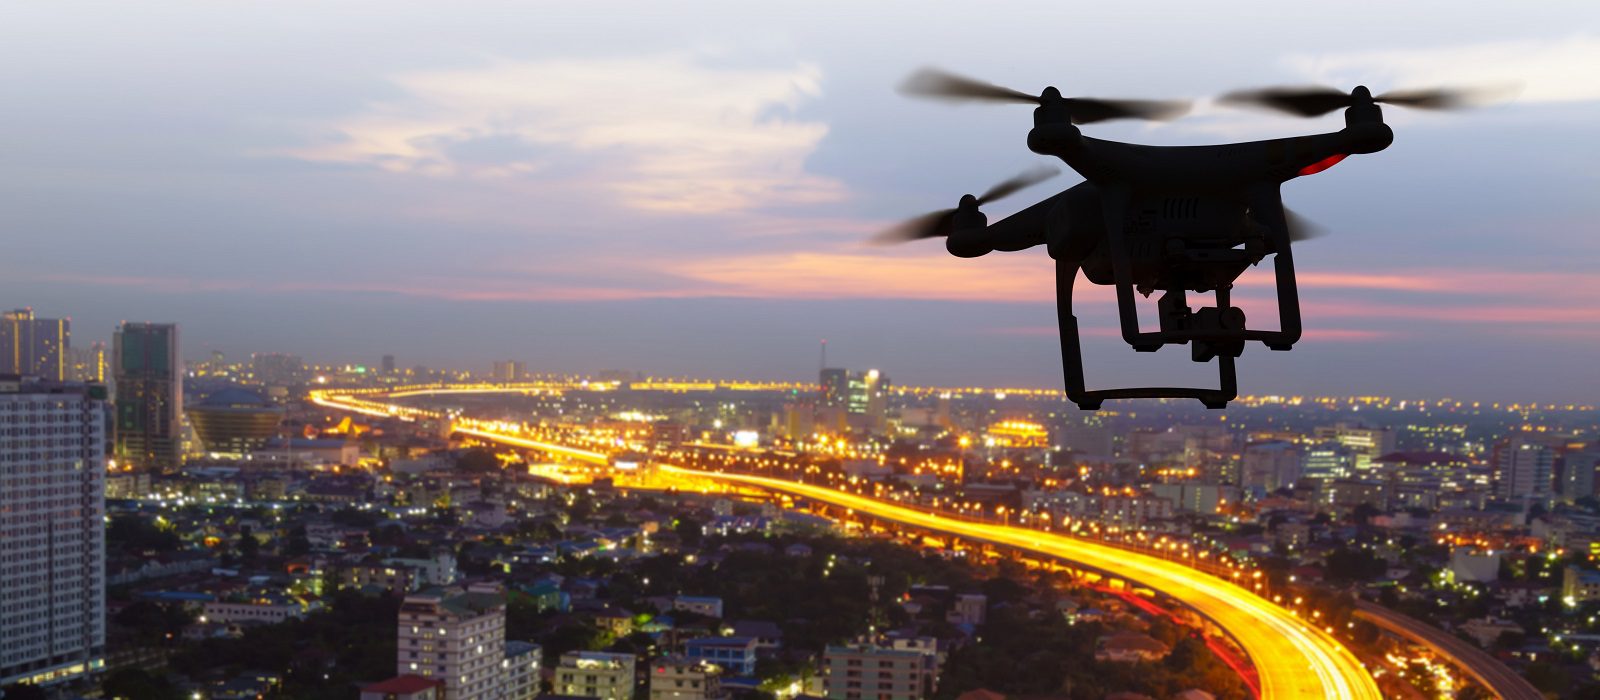 Drones and insurance: Achmea aims to lead the way - International Cooperative Mutual Federation